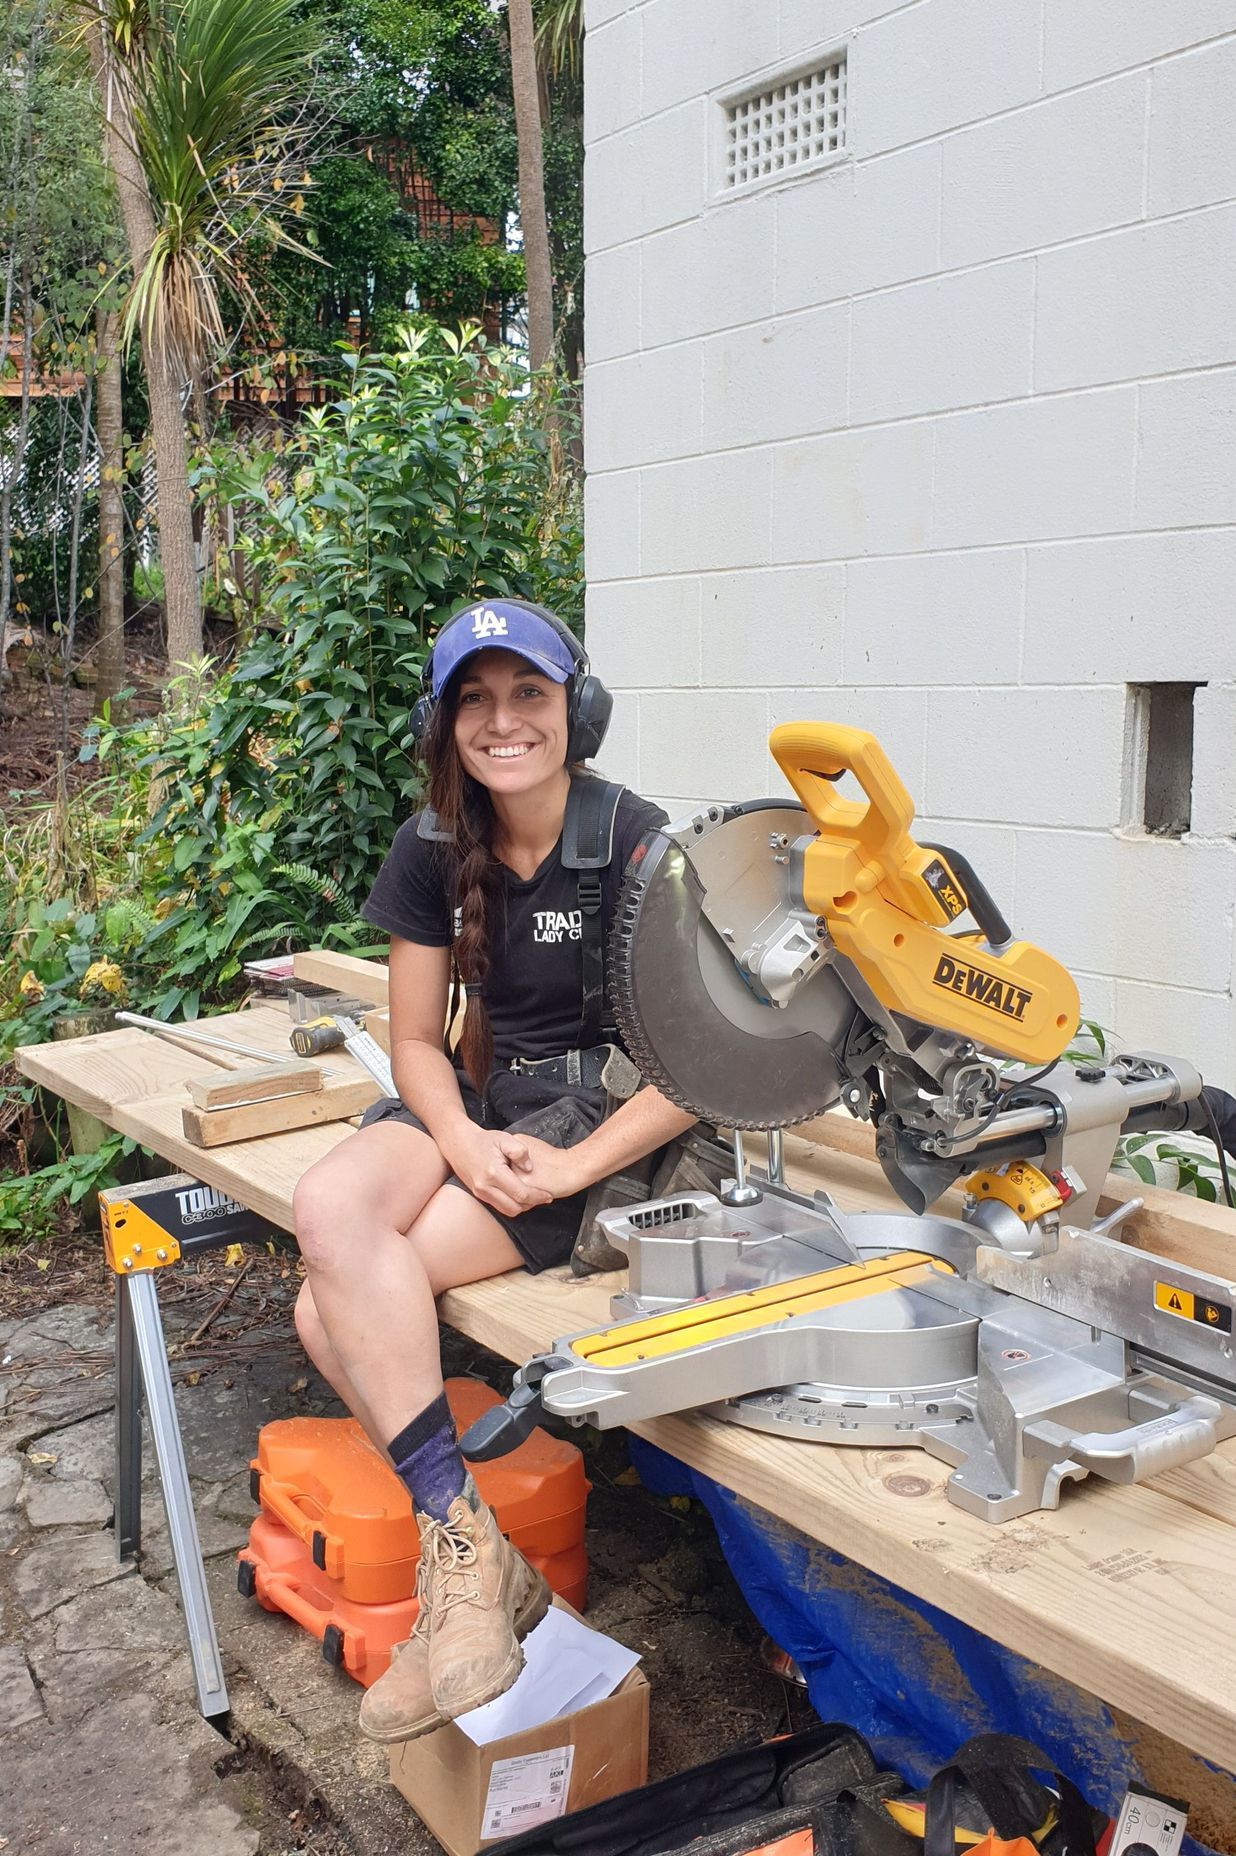 Breaking barriers in the trades: Bex the builder